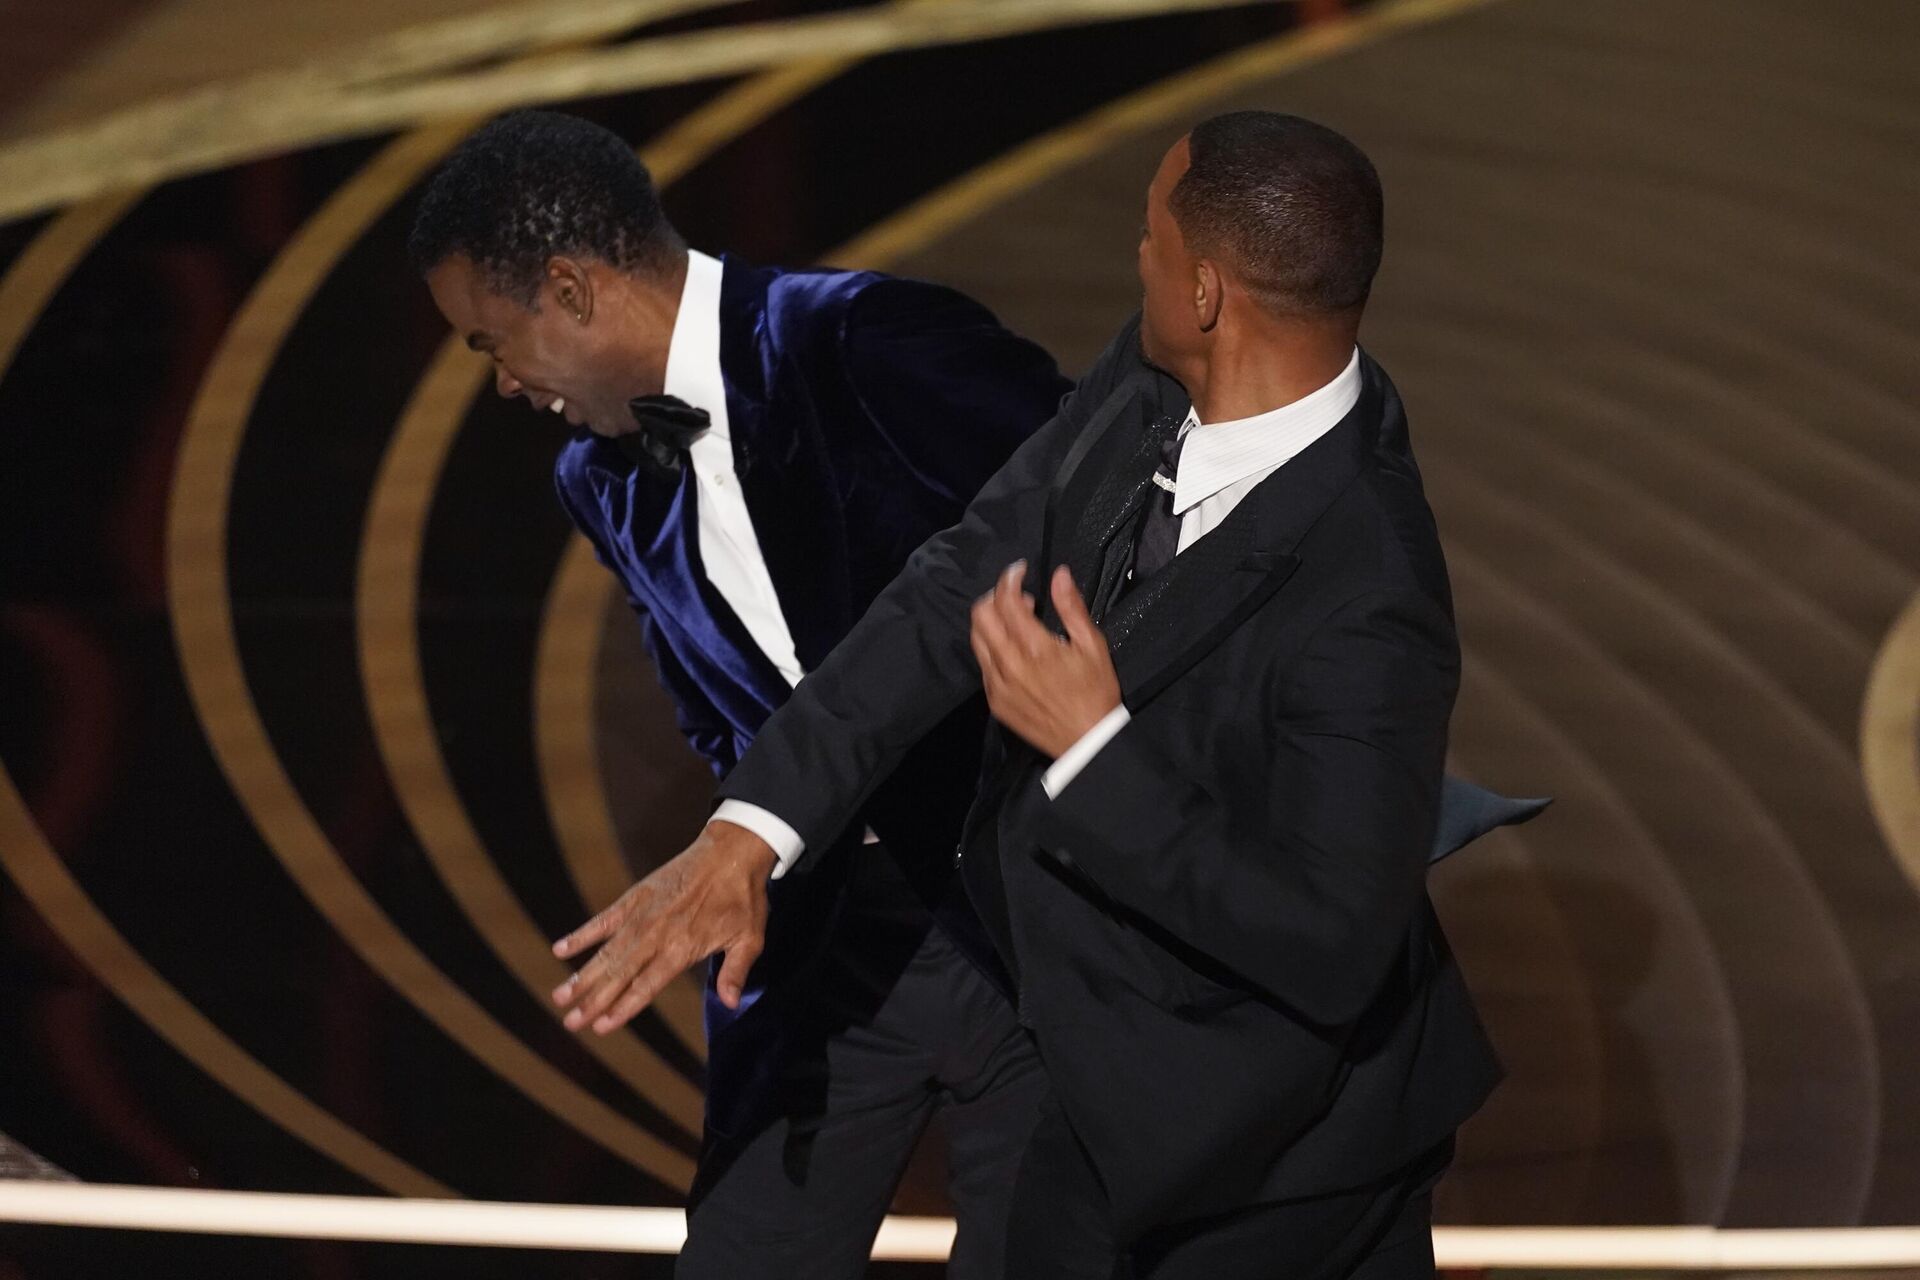 Will Smith, right, hits presenter Chris Rock on stage while presenting the award for best documentary feature at the Oscars on Sunday, March 27, 2022, at the Dolby Theatre in Los Angeles. - Sputnik International, 1920, 23.12.2022